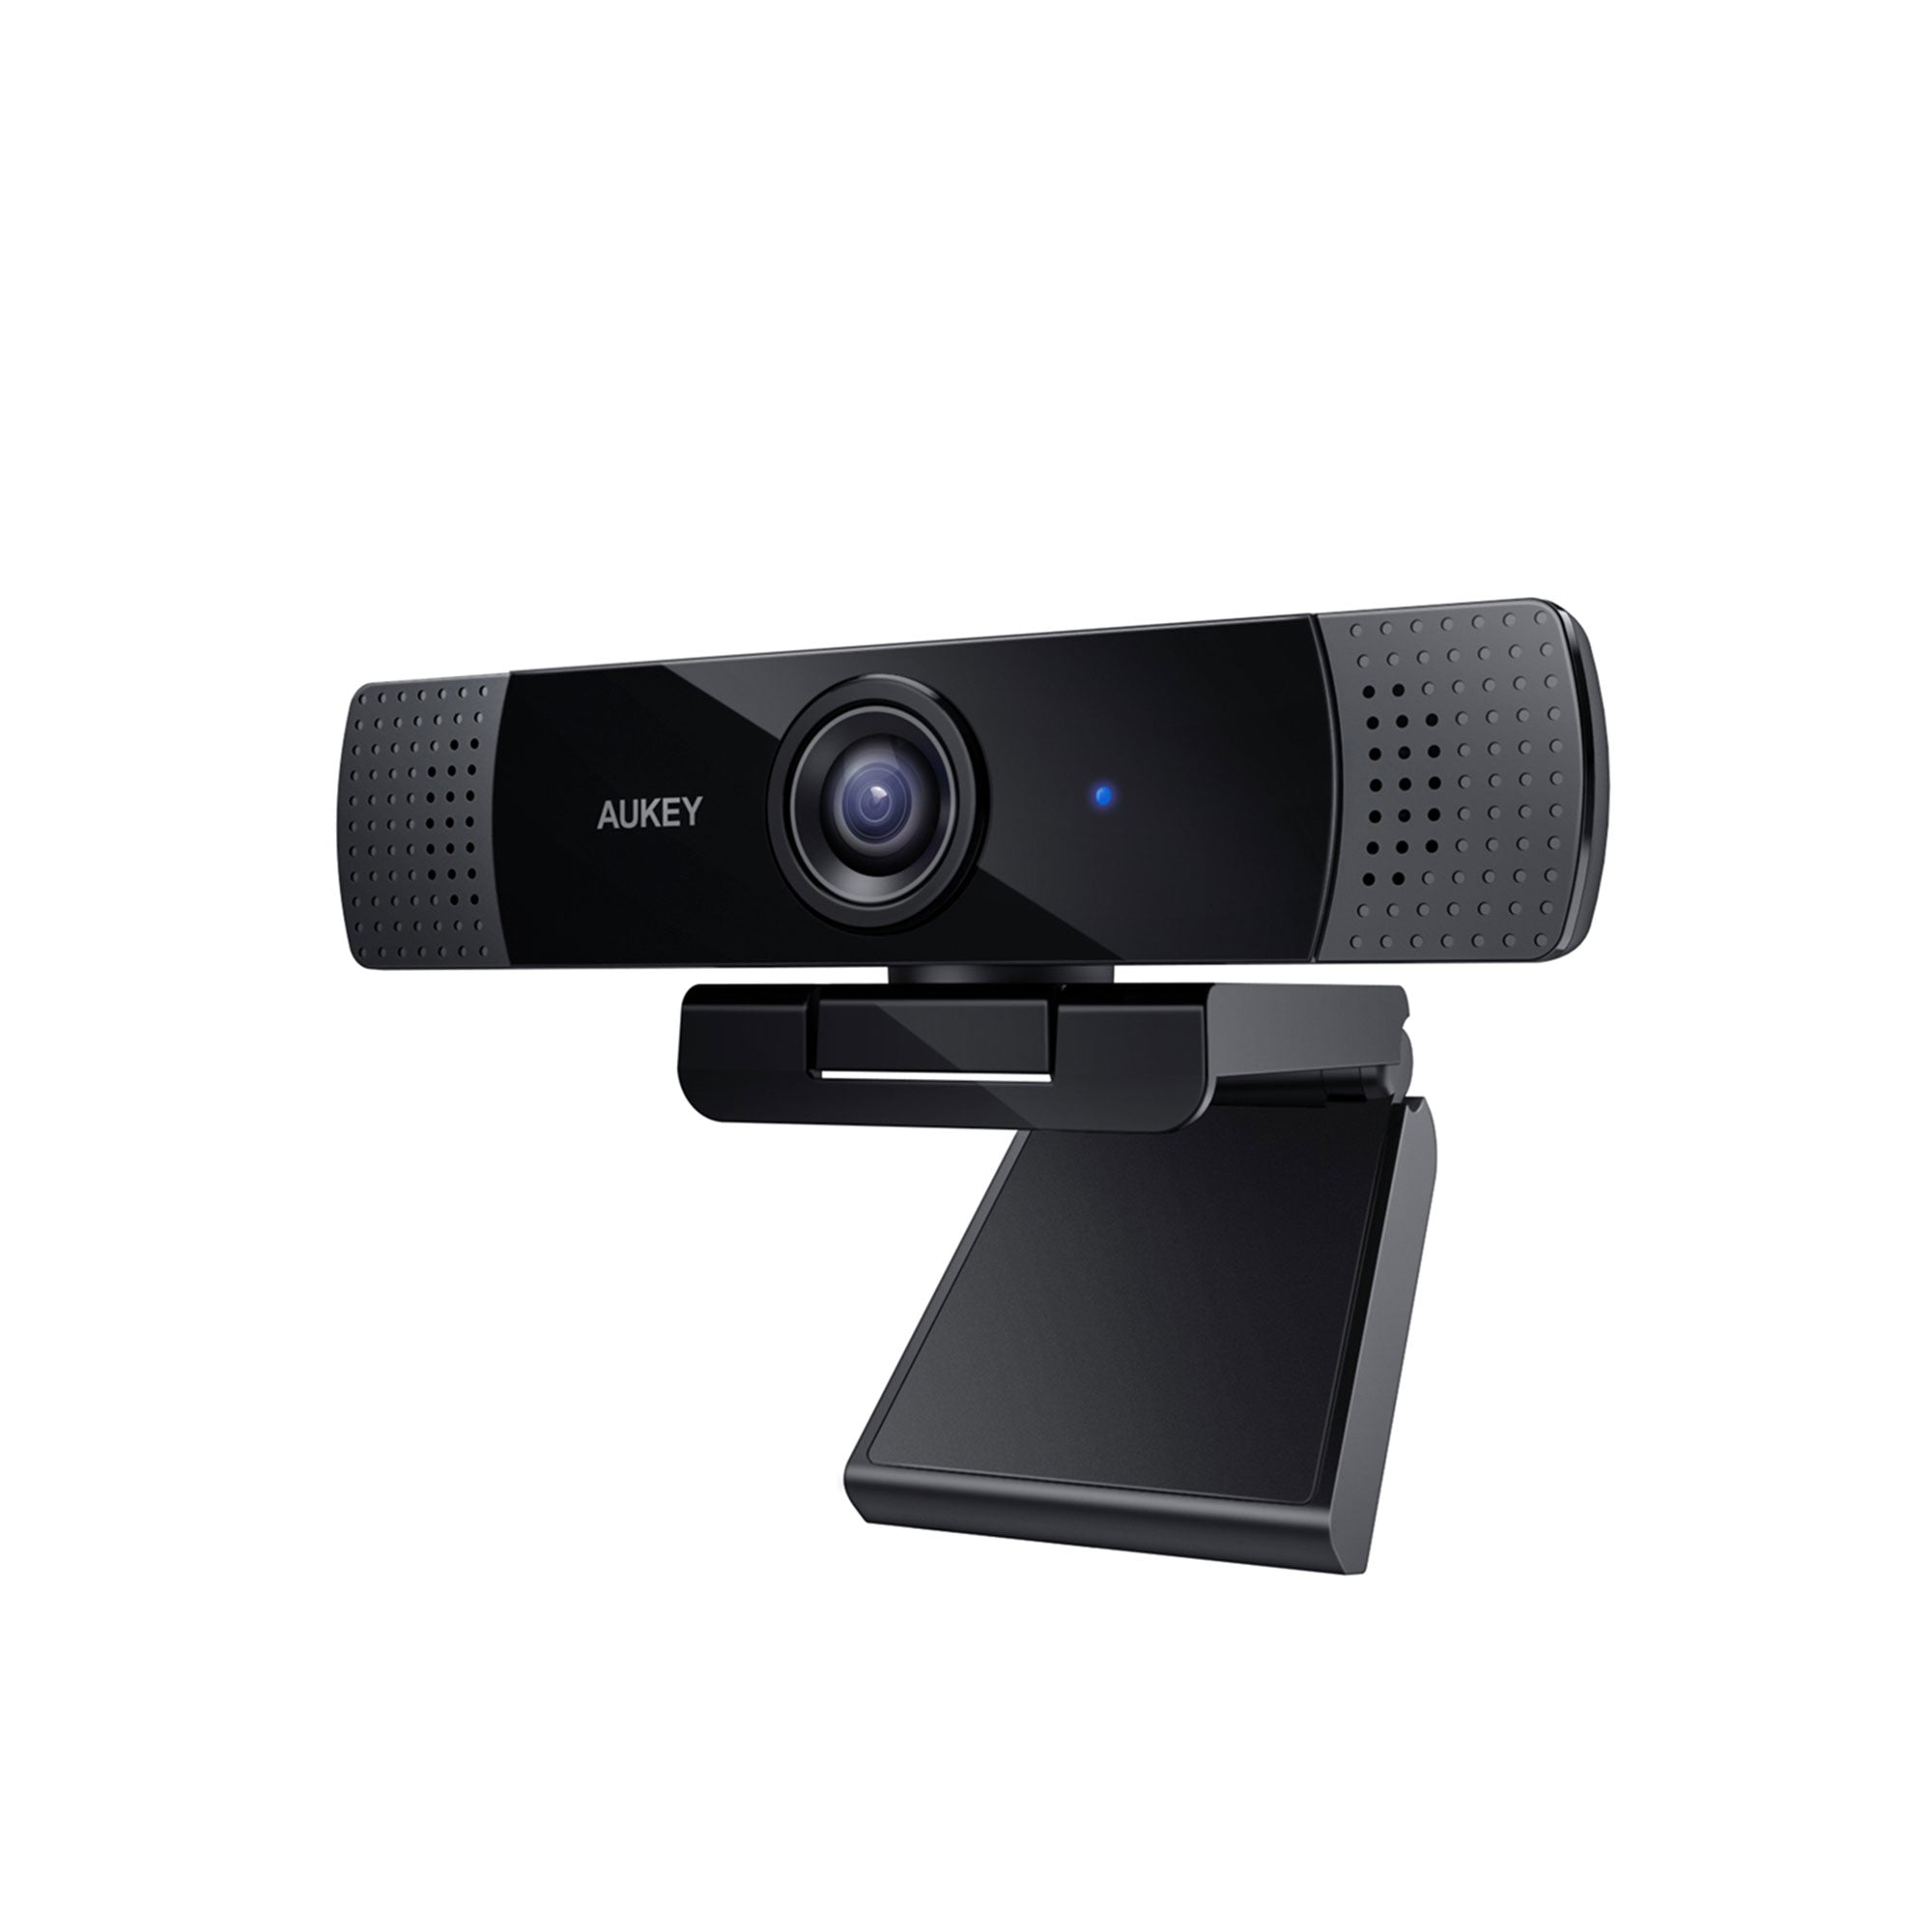 PC-LM1E 1080p FHD Webcam Live Streaming Camera with Stereo Microphone